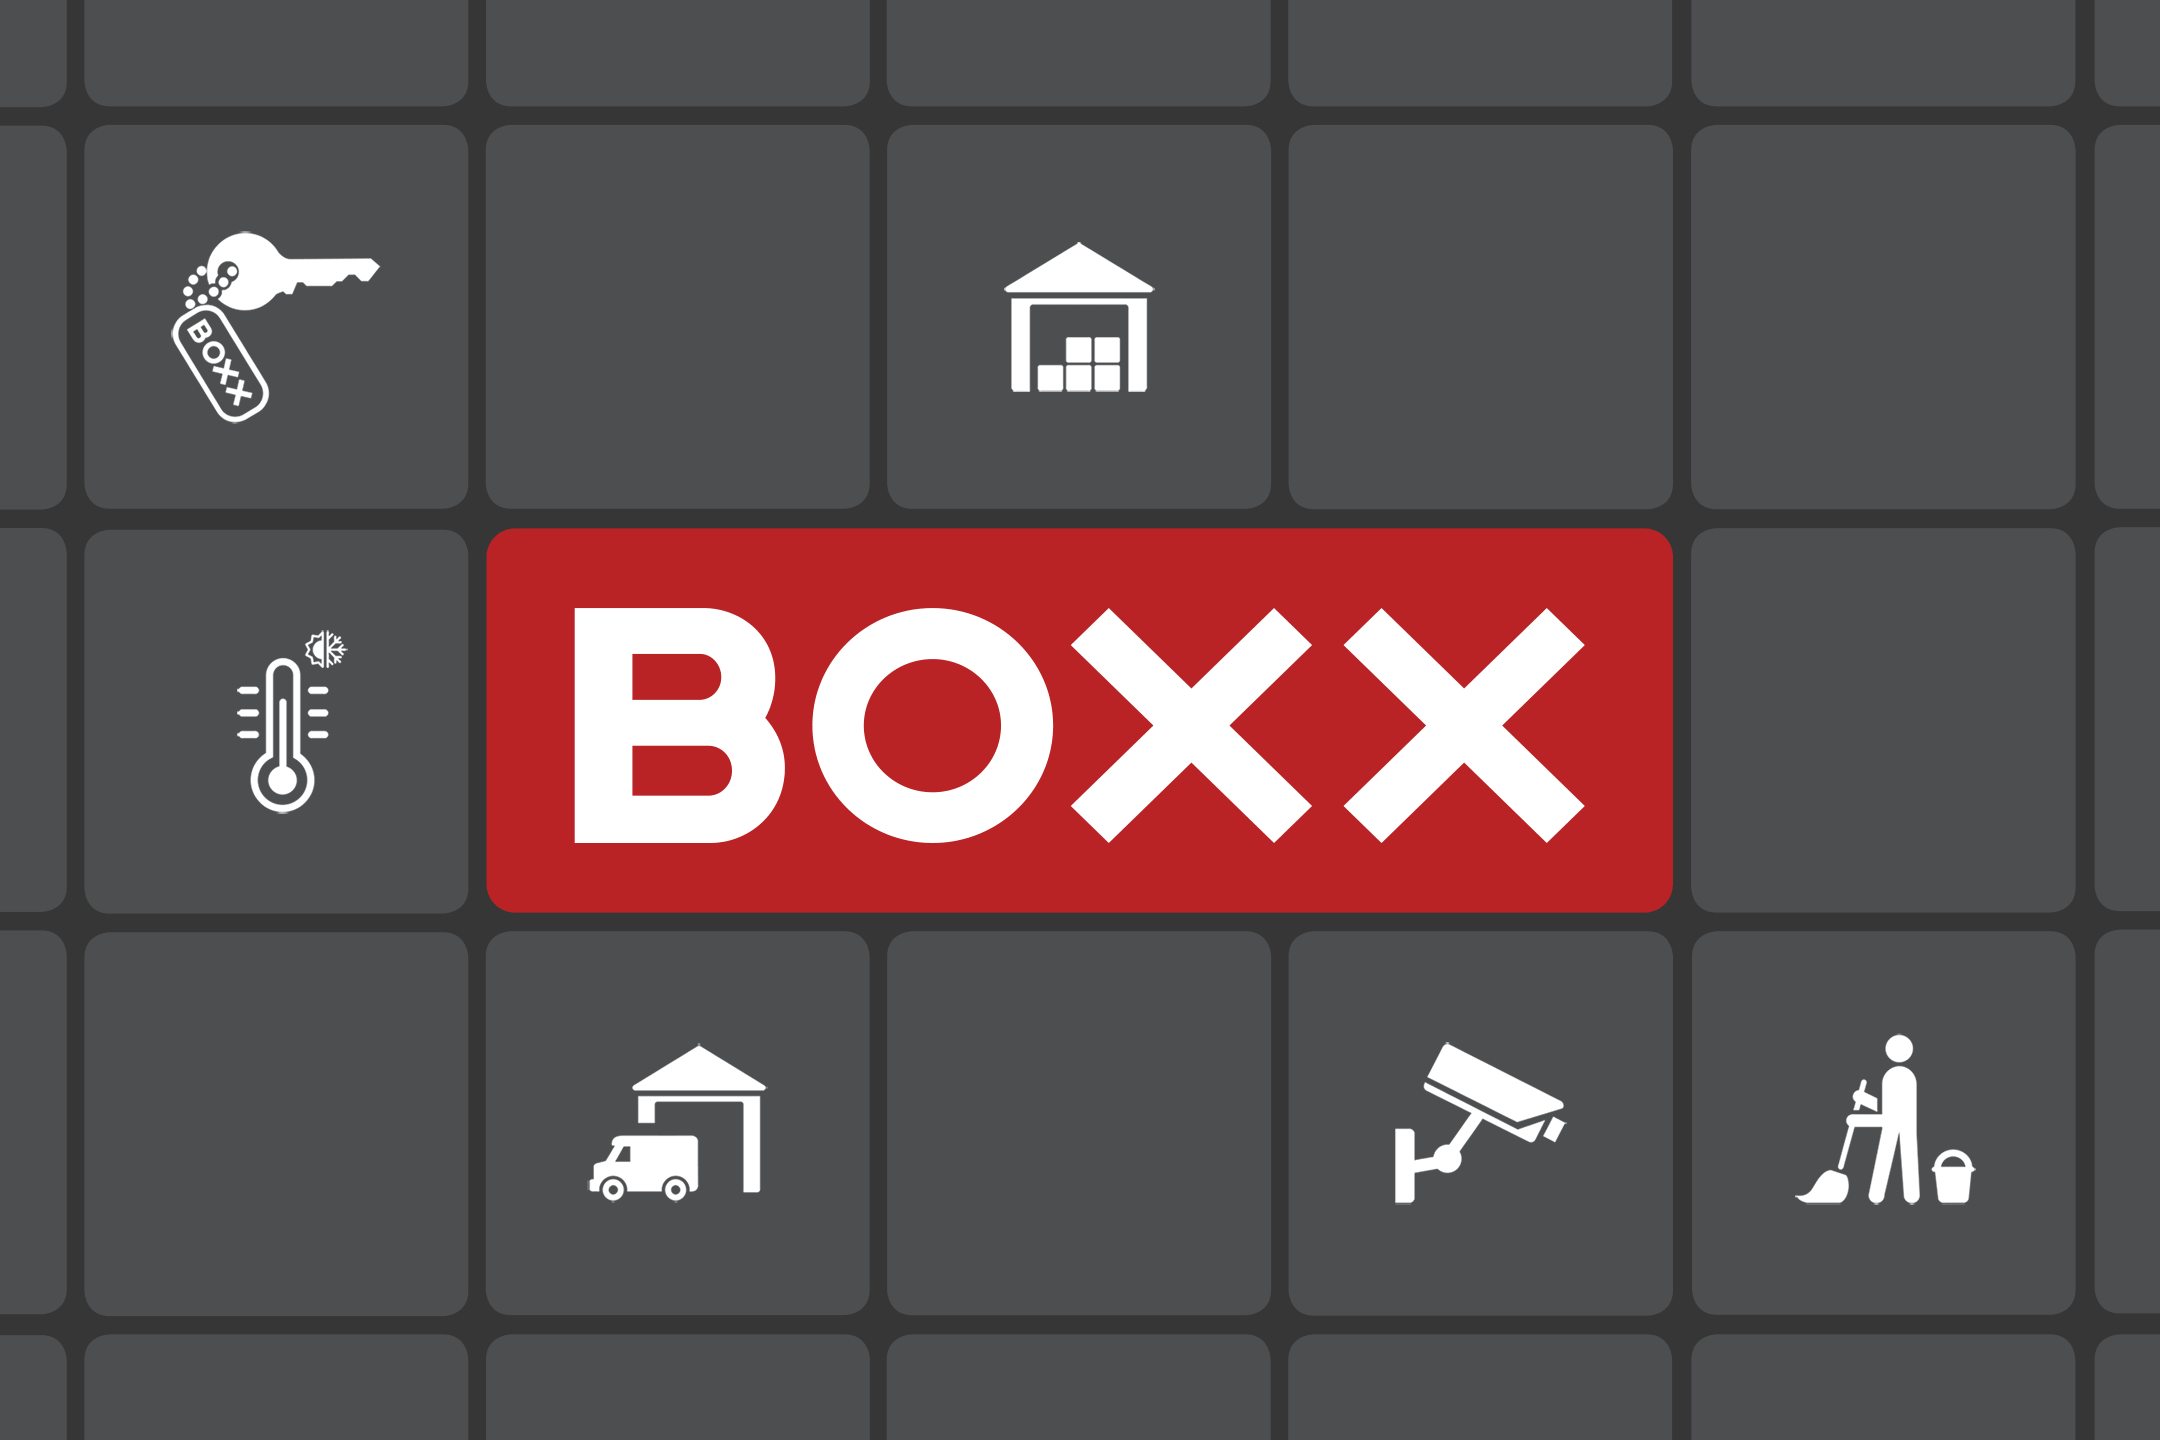 Introduction animation for BOXX case study